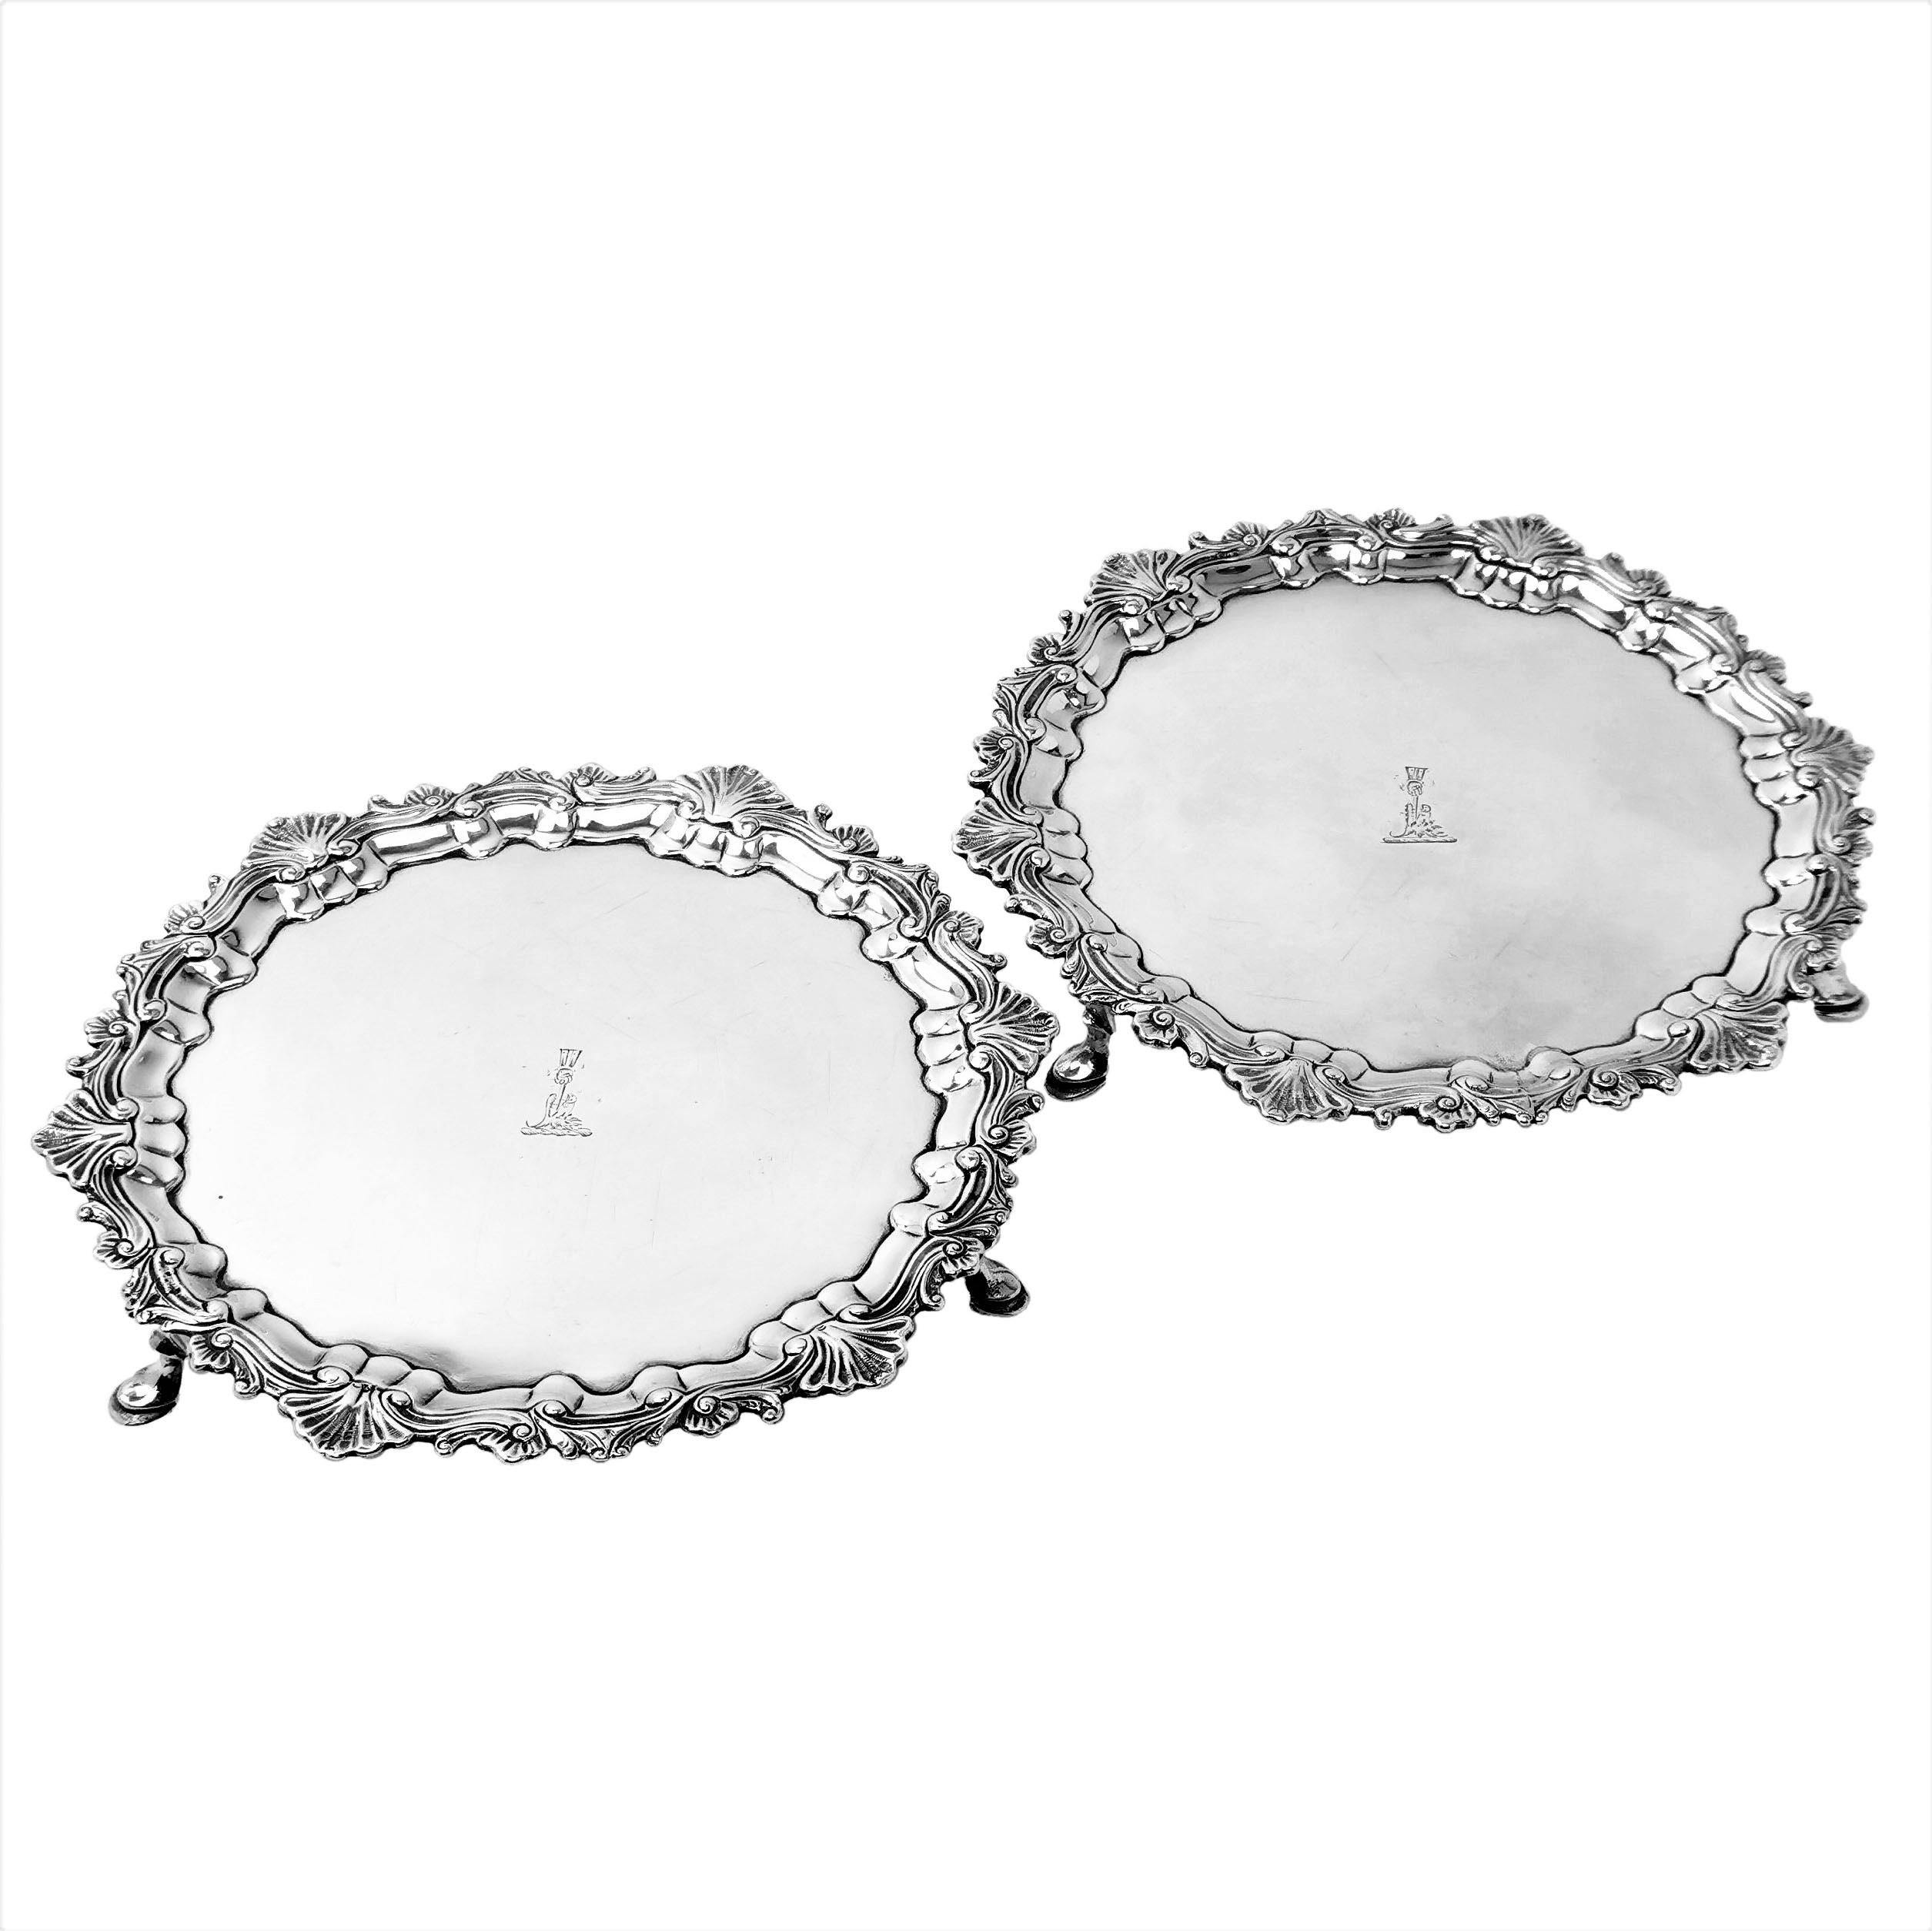 A lovely pair of Antique George III solid silver salvers with classic shell and scroll borders. Each Salver has crest engraved in the centre and stands on three hoof feet. 

Made in Dublin, Ireland in c. 1770 by Charles Townsend.

Approx. Total